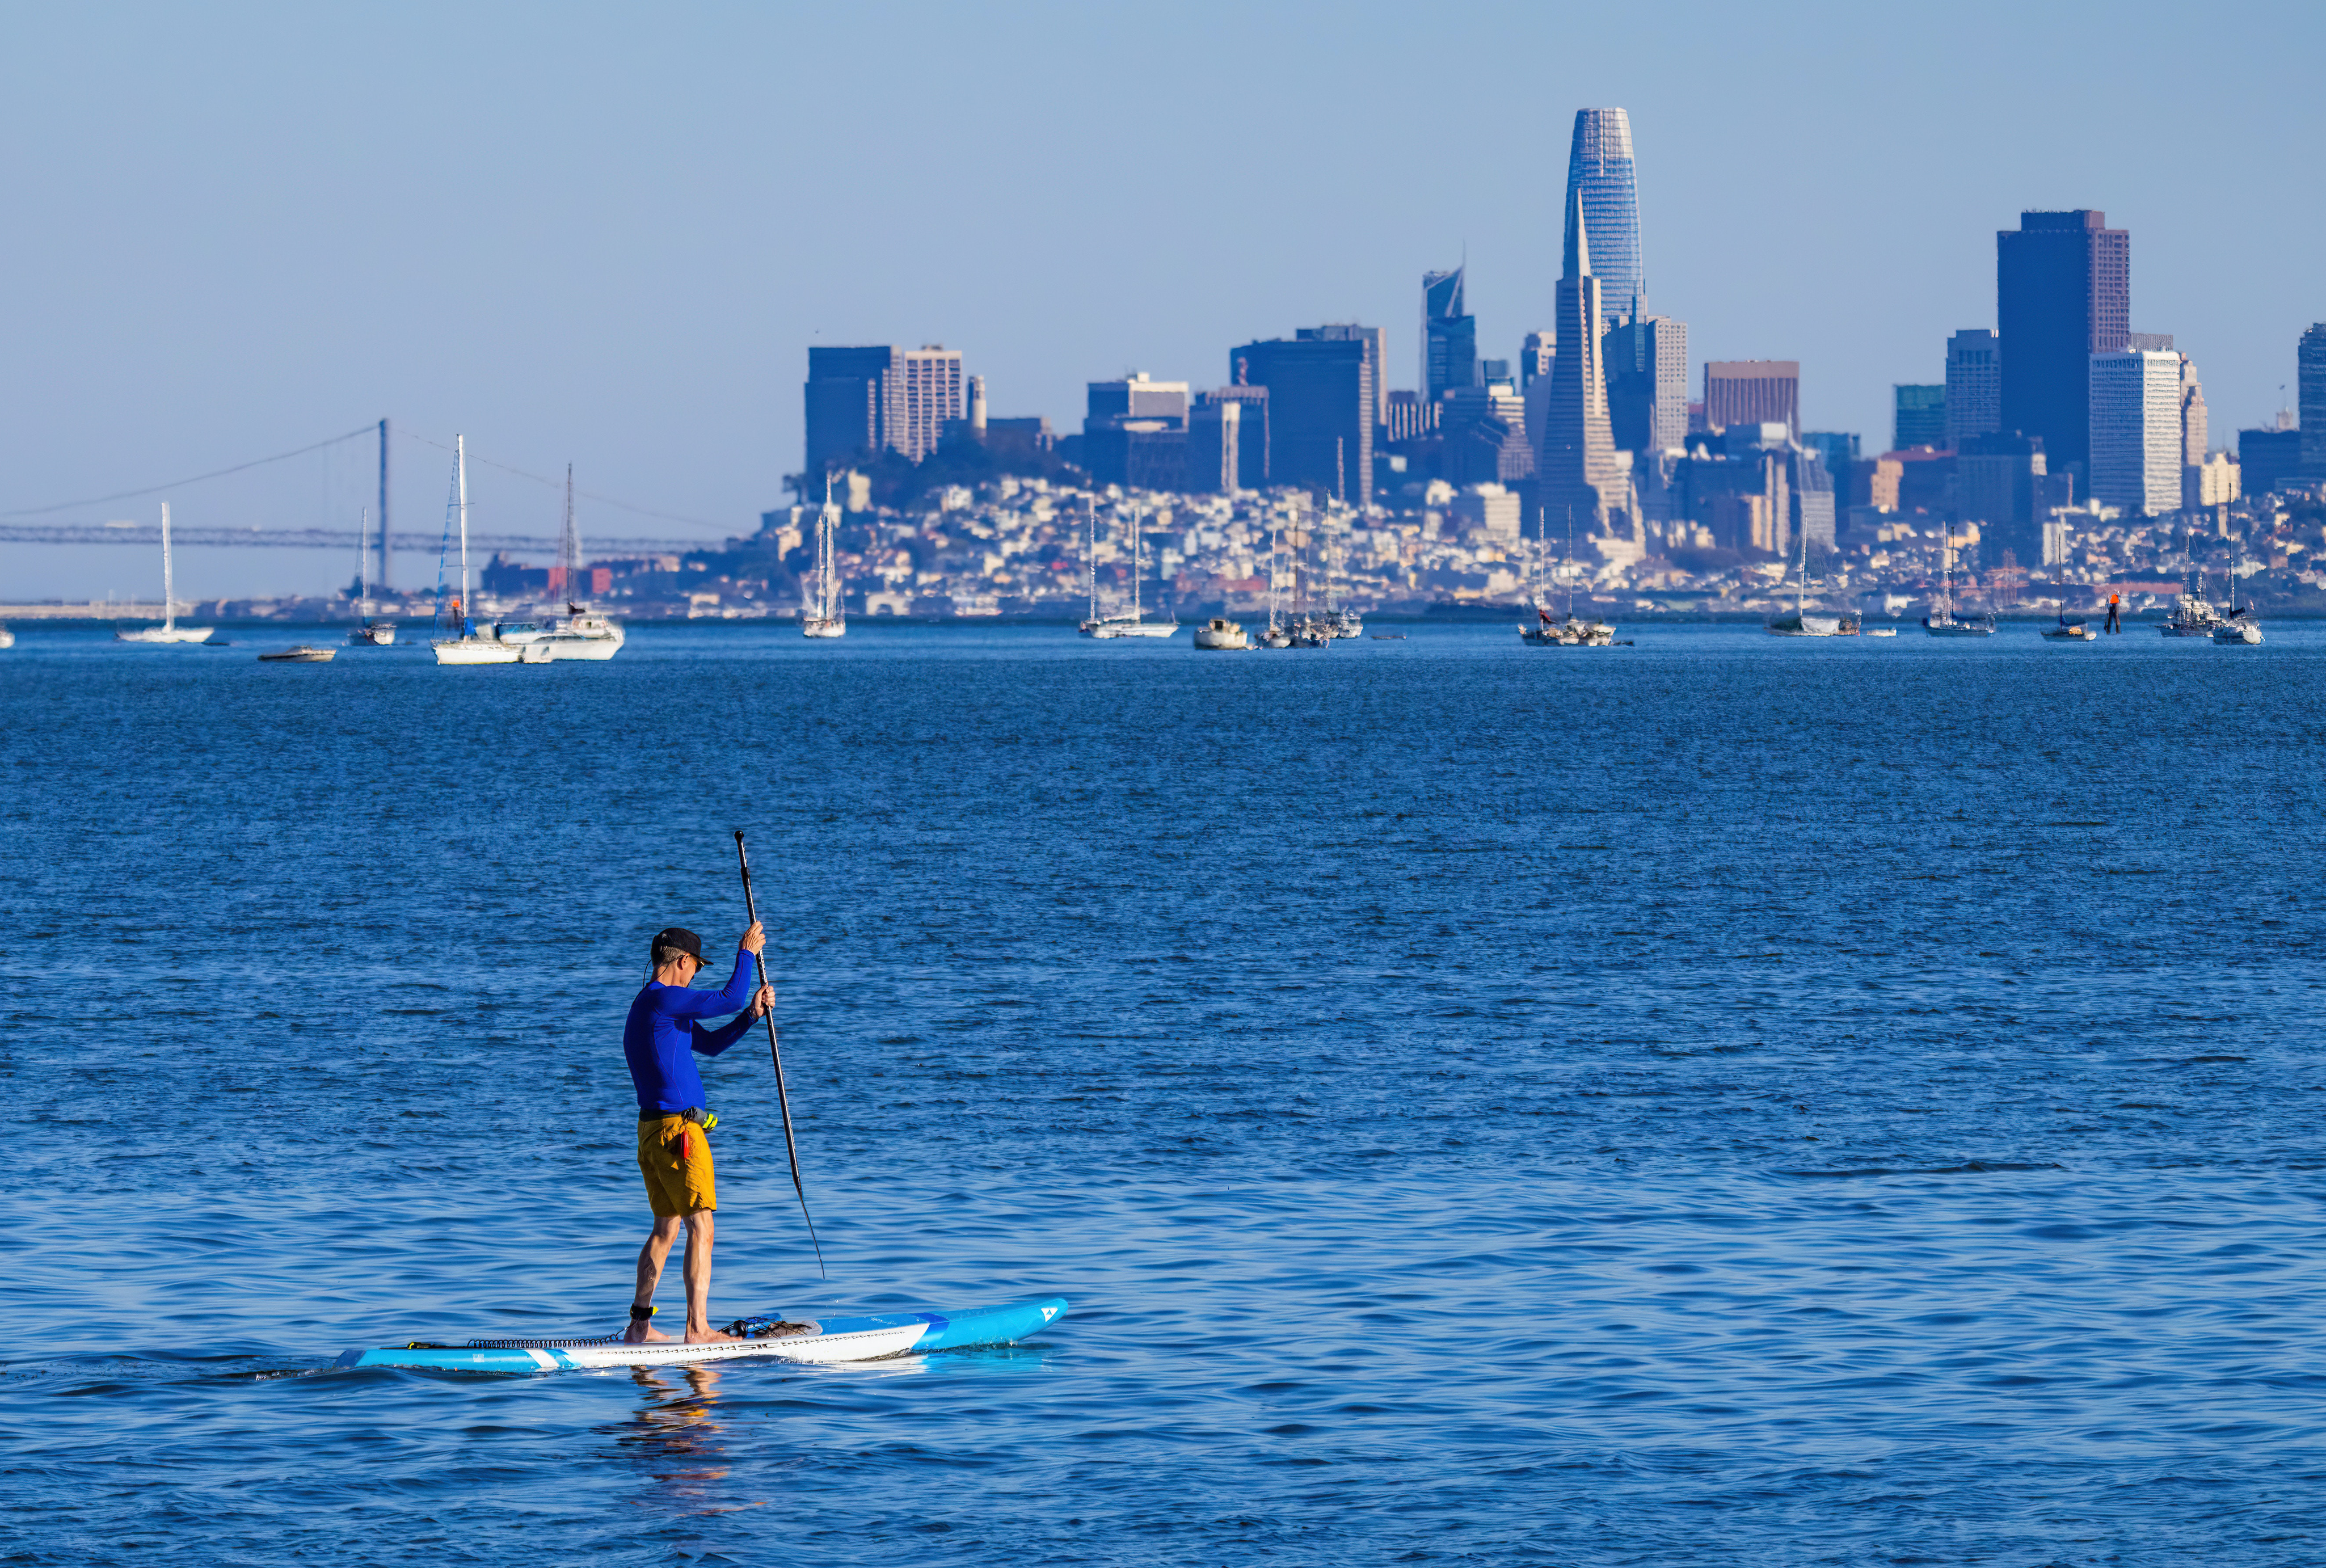 Paddle boarding with view of the city